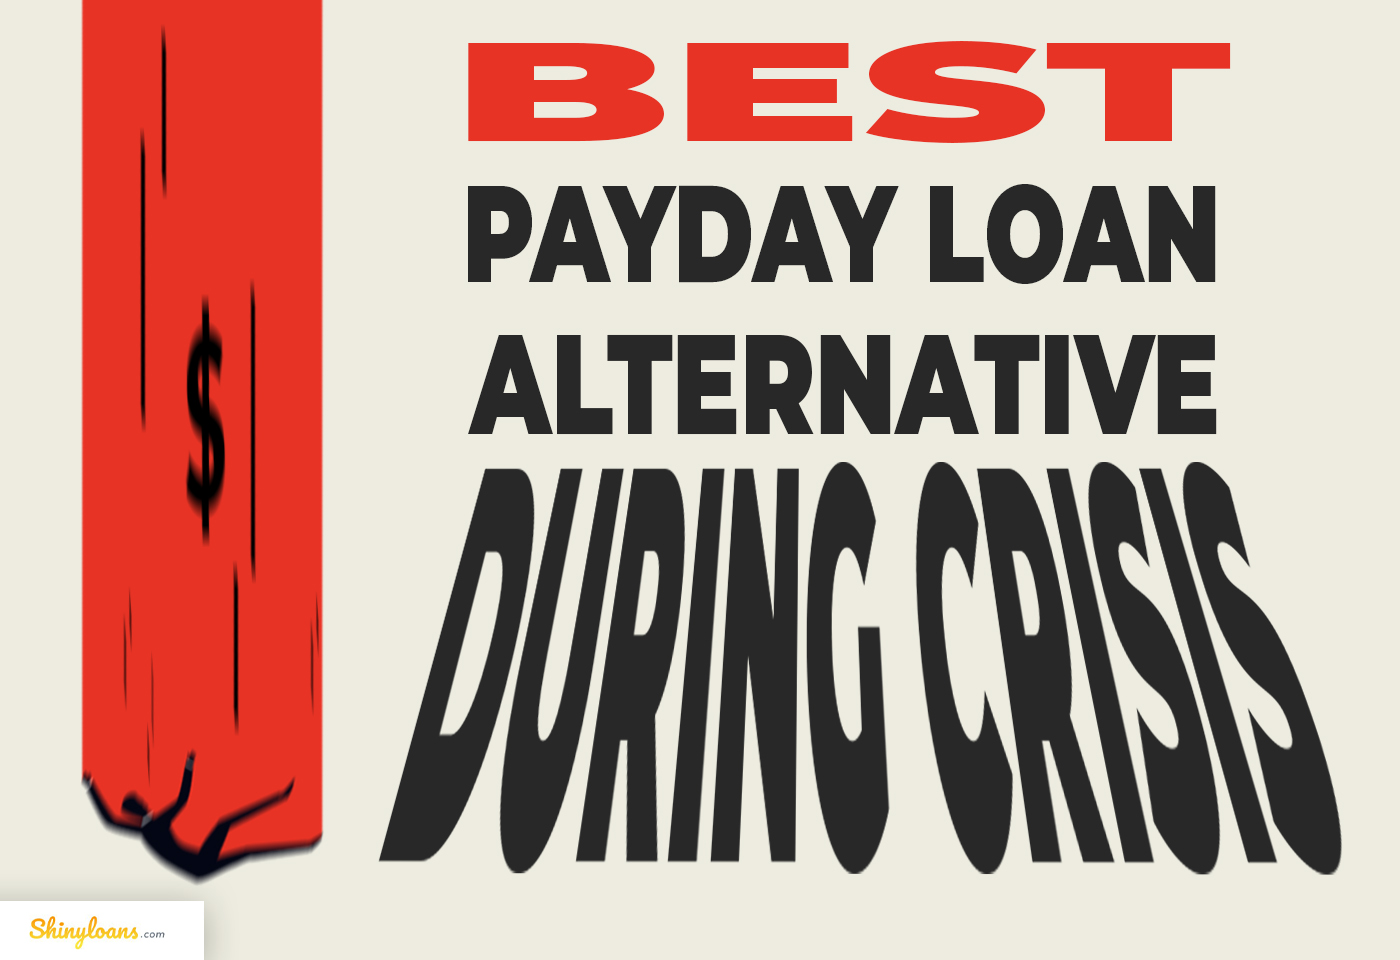 Best Payday Loan Alternative During Crisis